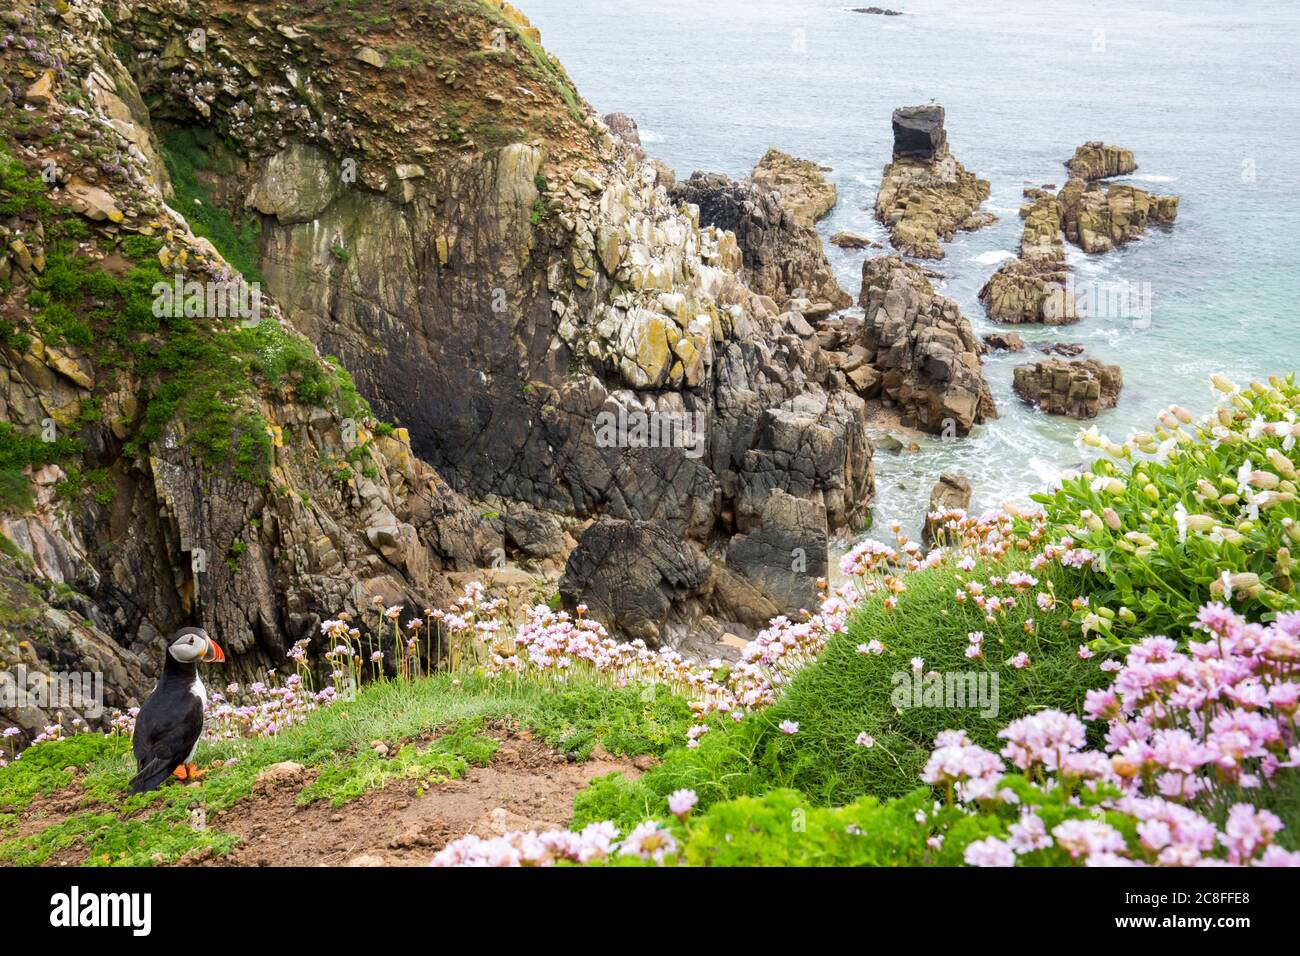 Atlantic puffin, Common puffin (Fratercula arctica), sitting on the egde of a cliff overlooking the ocean, Ireland, Saltee island Stock Photo